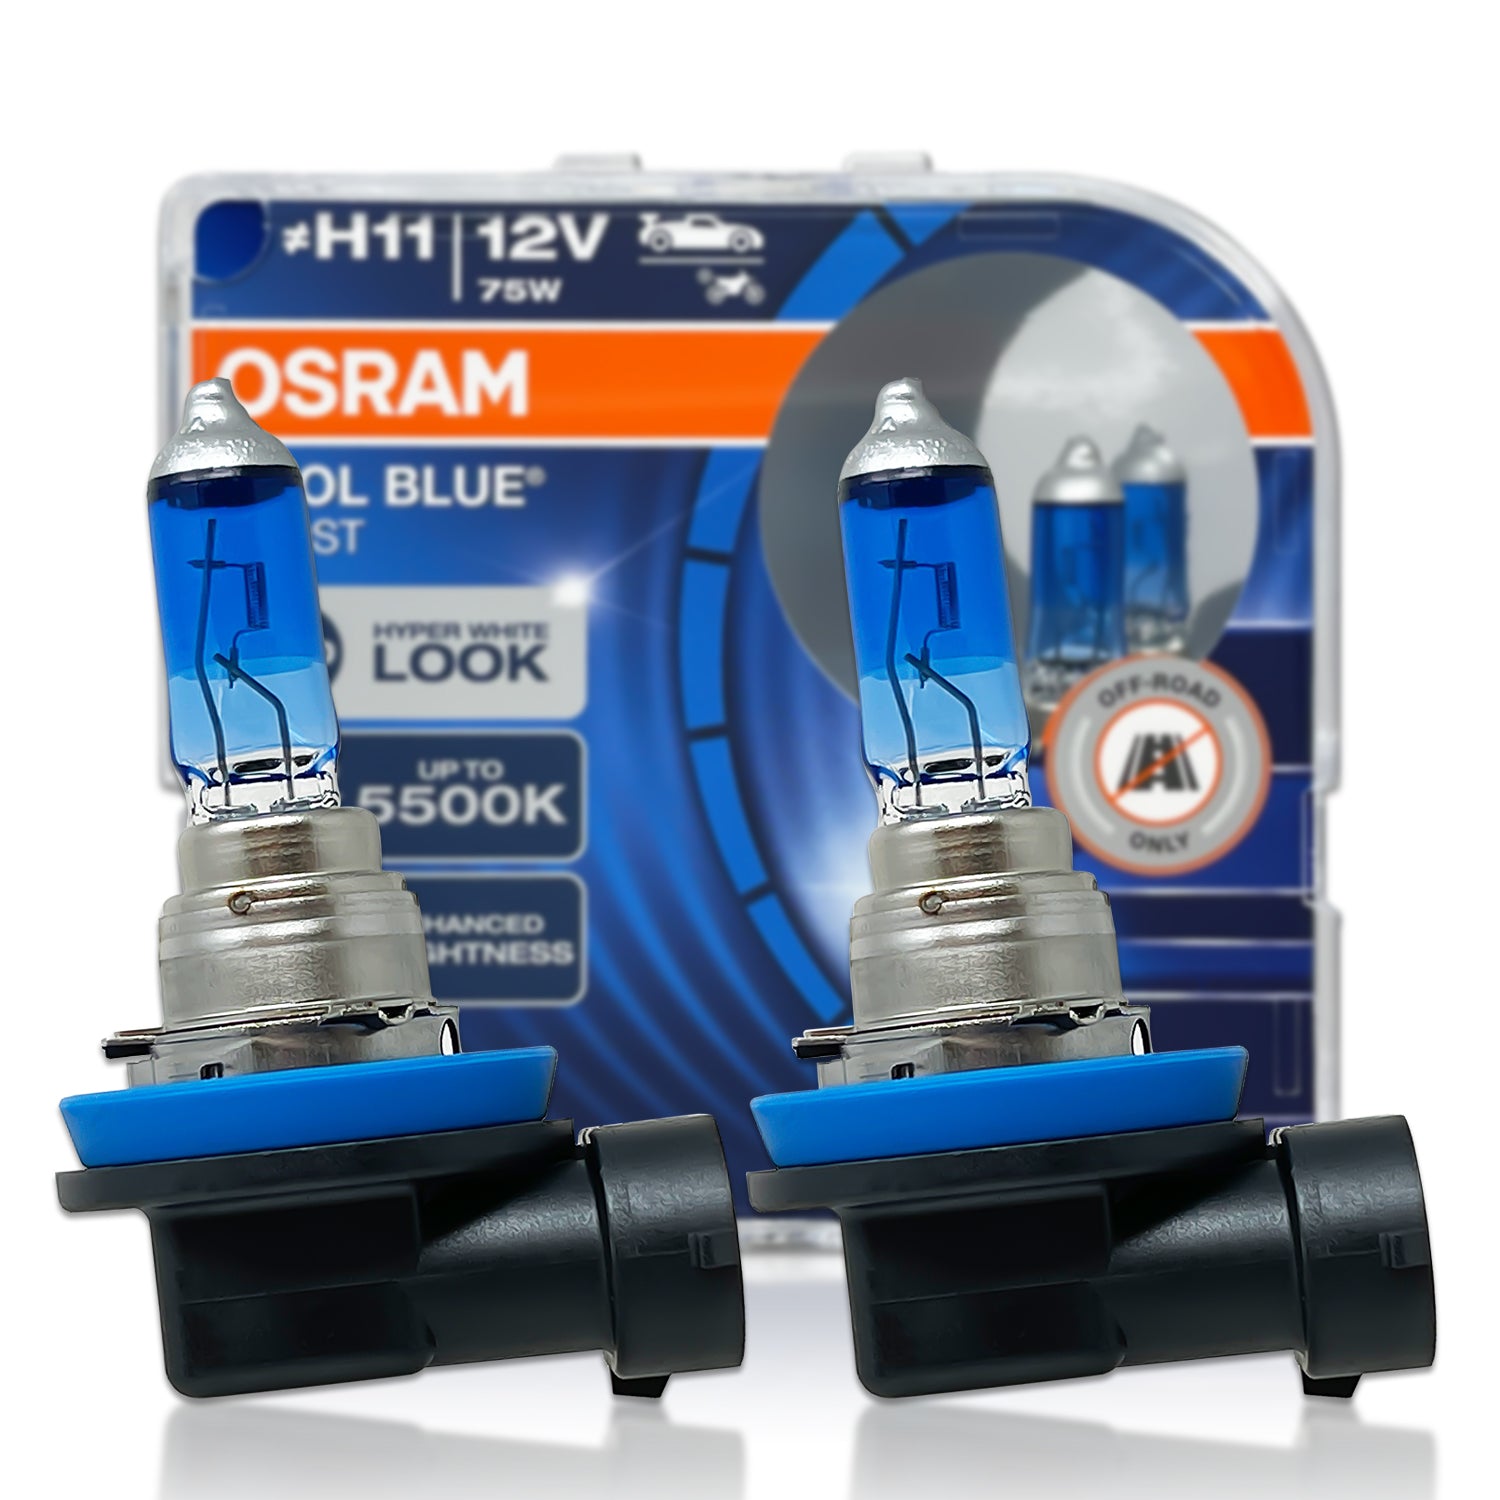 Kit 2 Lamps H11 12V/75W Osram Cool Blue Boost Hcb